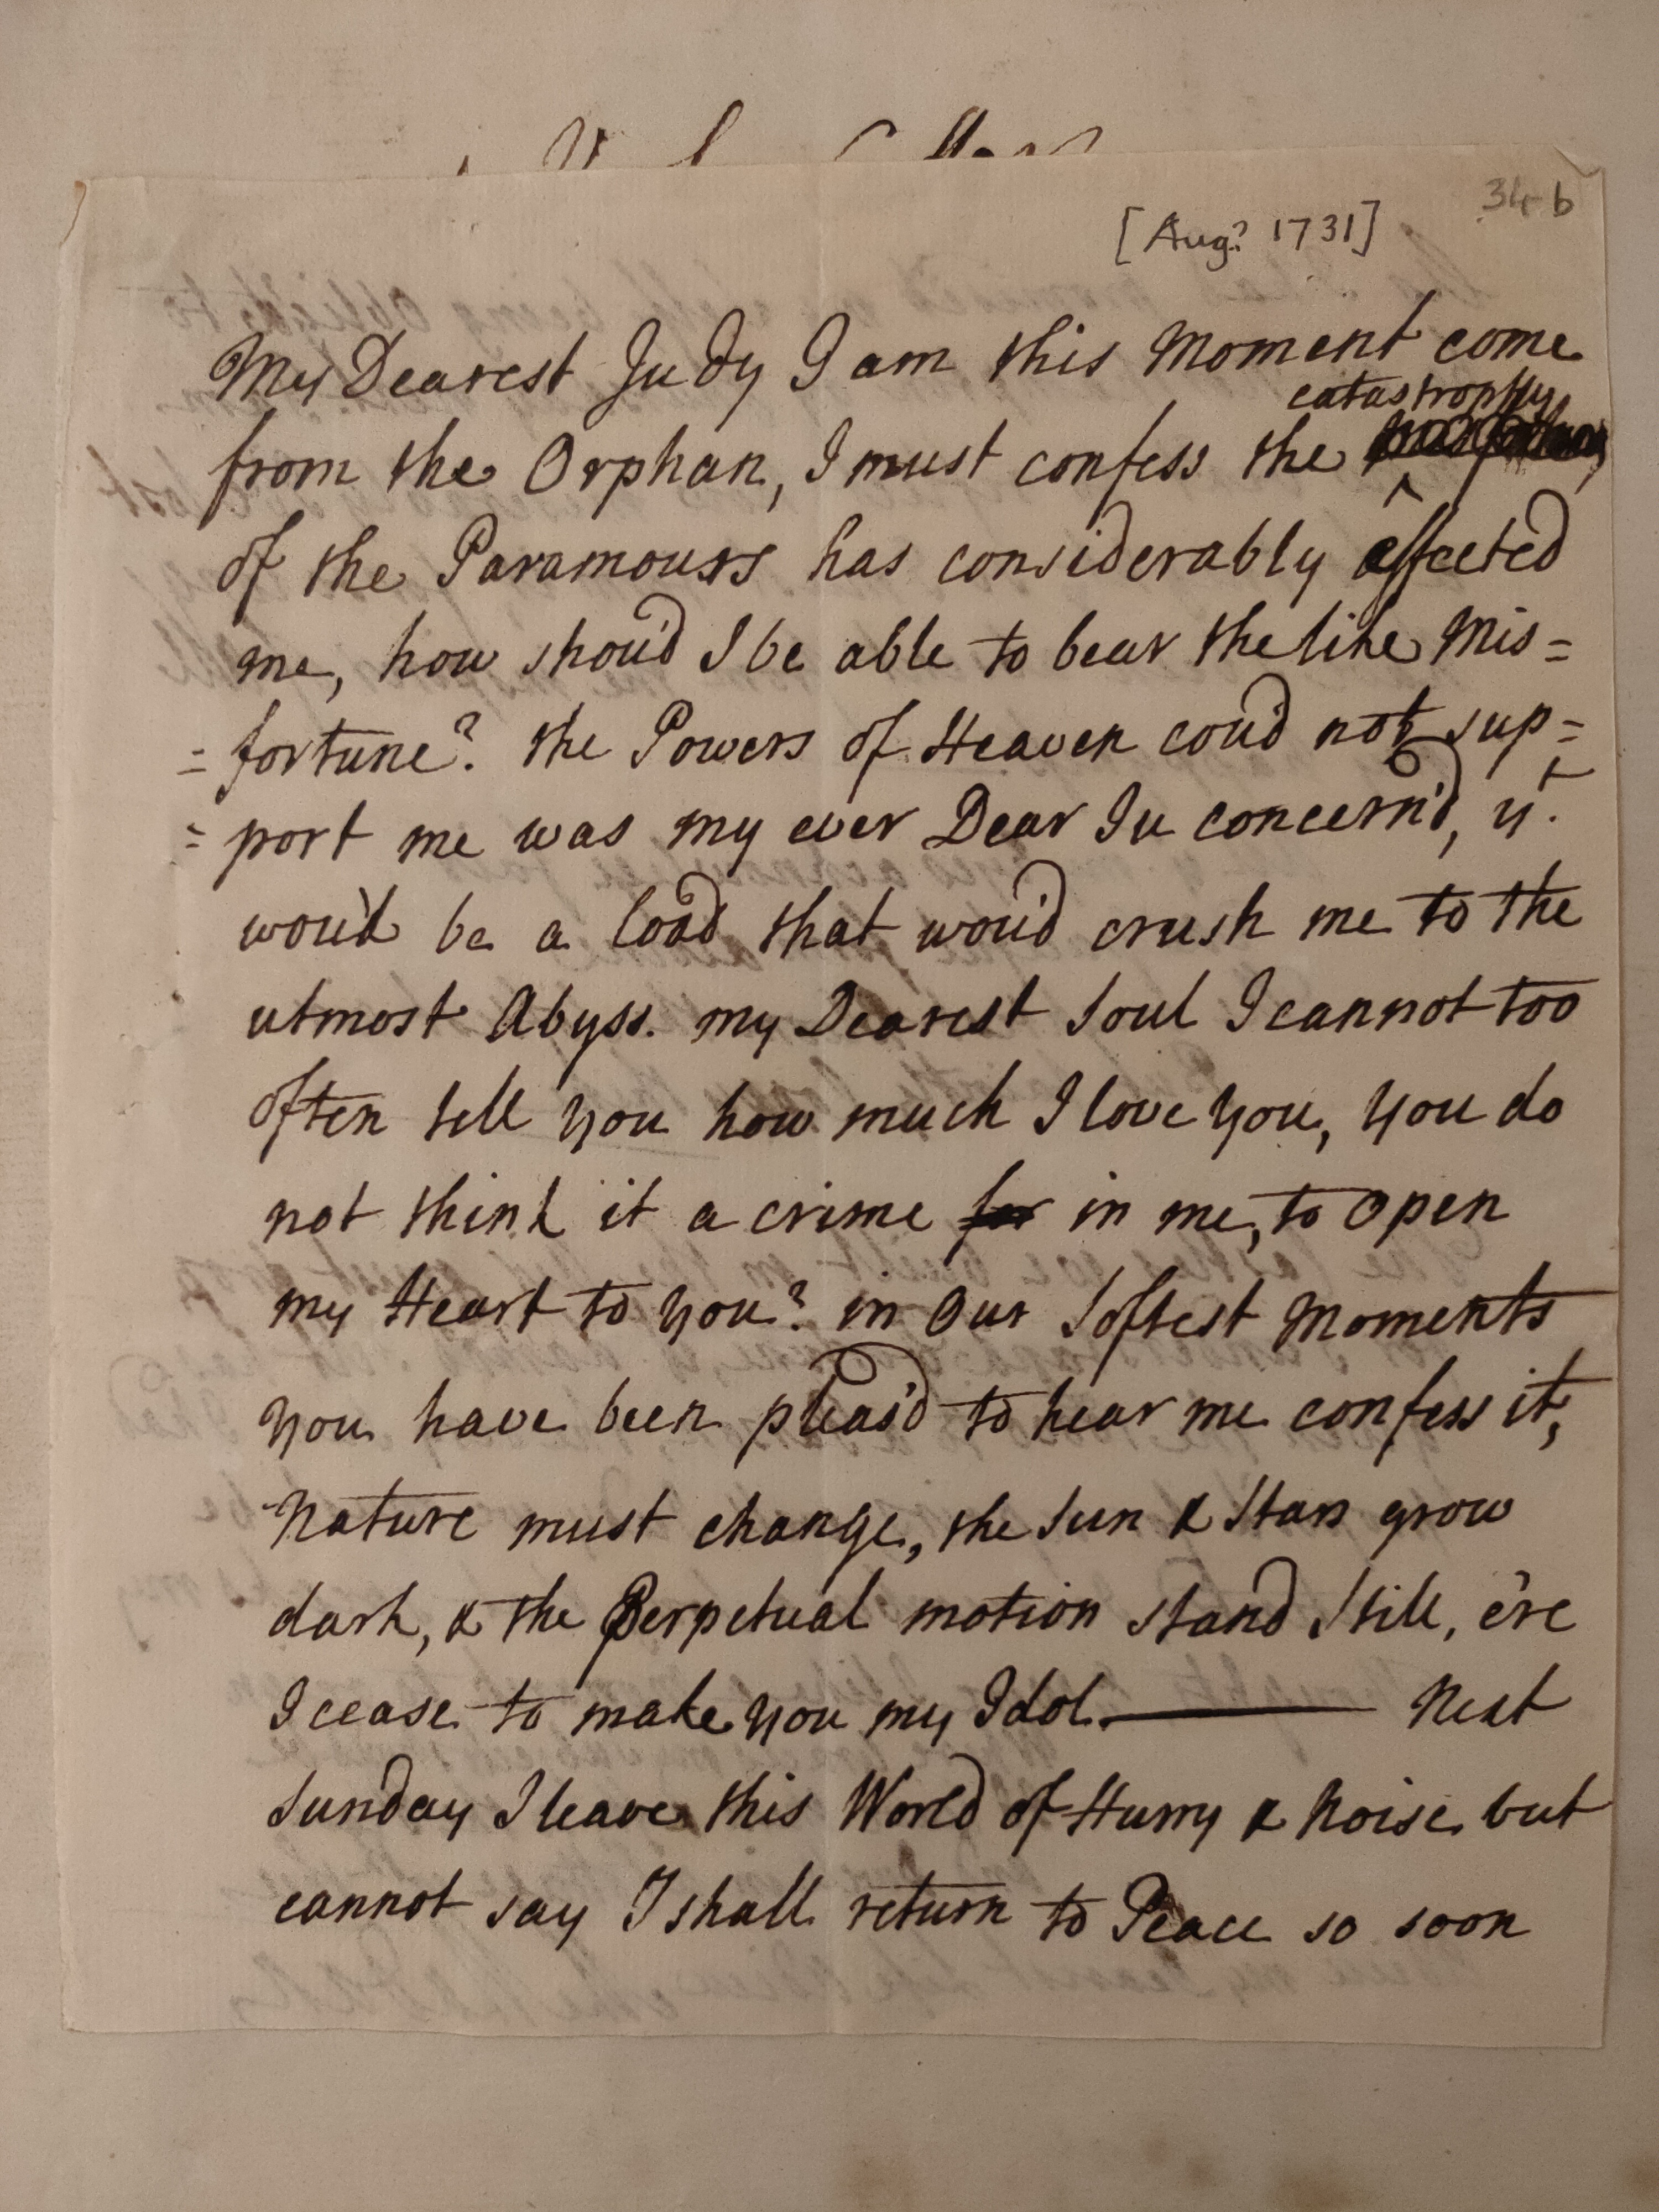 Image #1 of letter: Martin Madan to Judith Cowper, August 1731